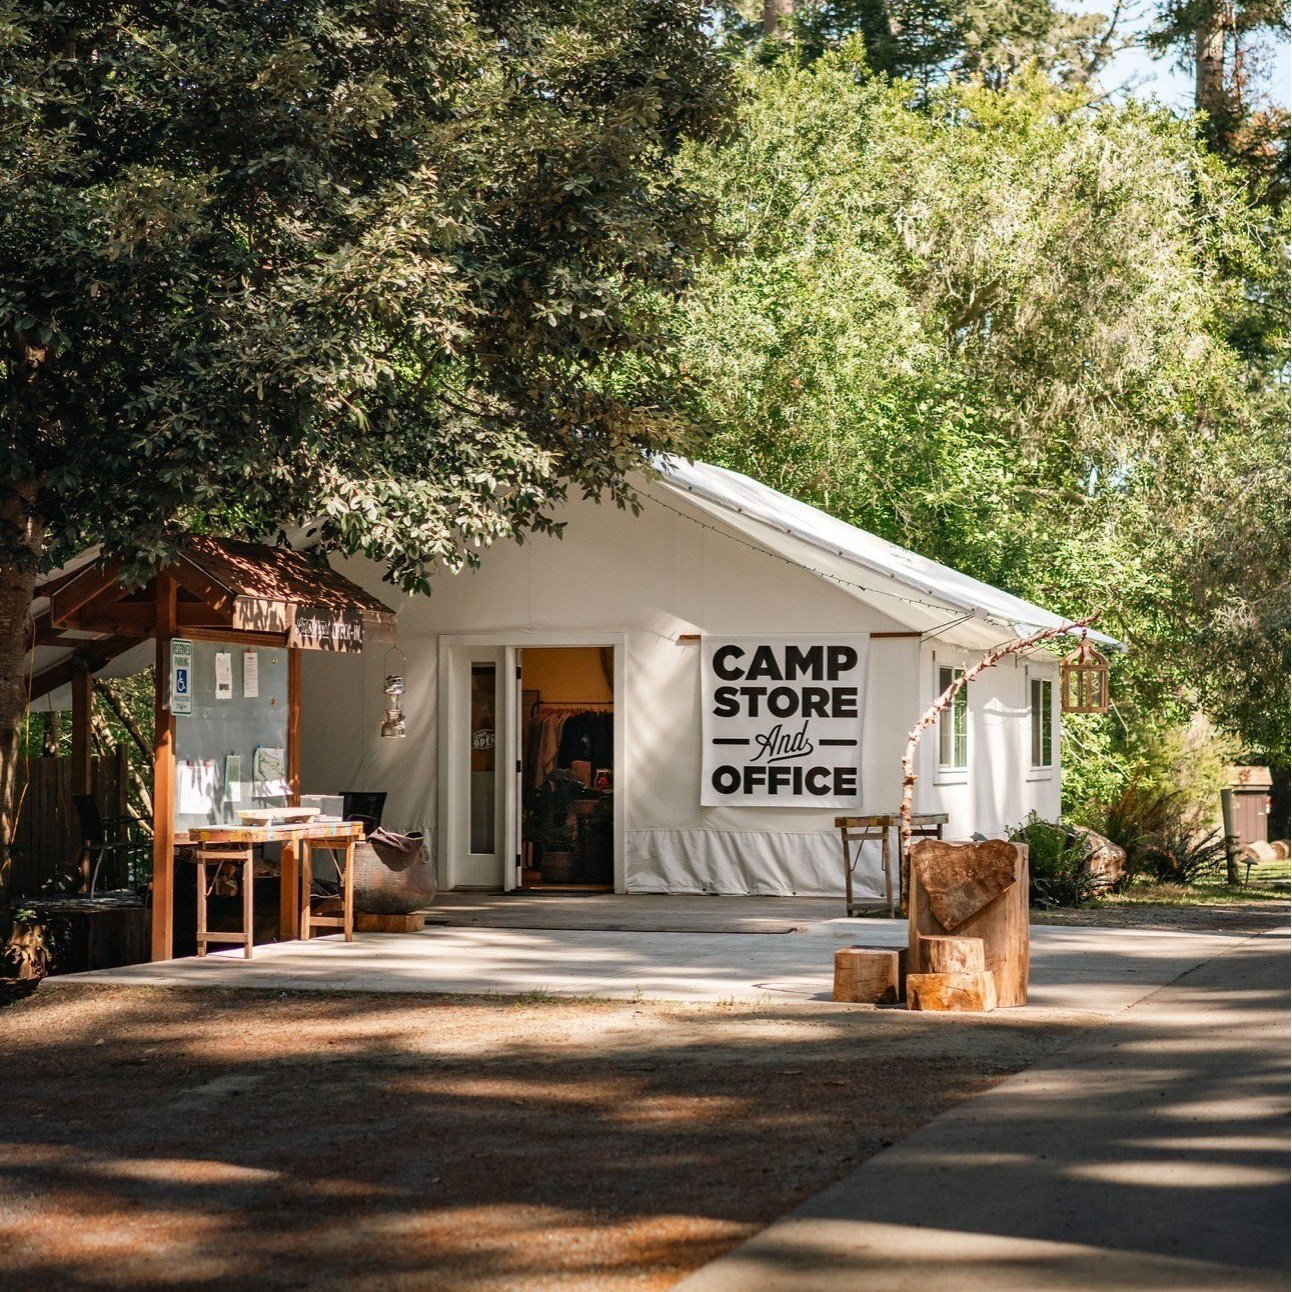 Campers love stopping in at the CampStore where we have quality small-production local wines, beers/ciders, campground merch, board games &amp; books to borrow + more! Stop in at check-in for all your camping extras :-)

#mendocino #mendocinogrove #g